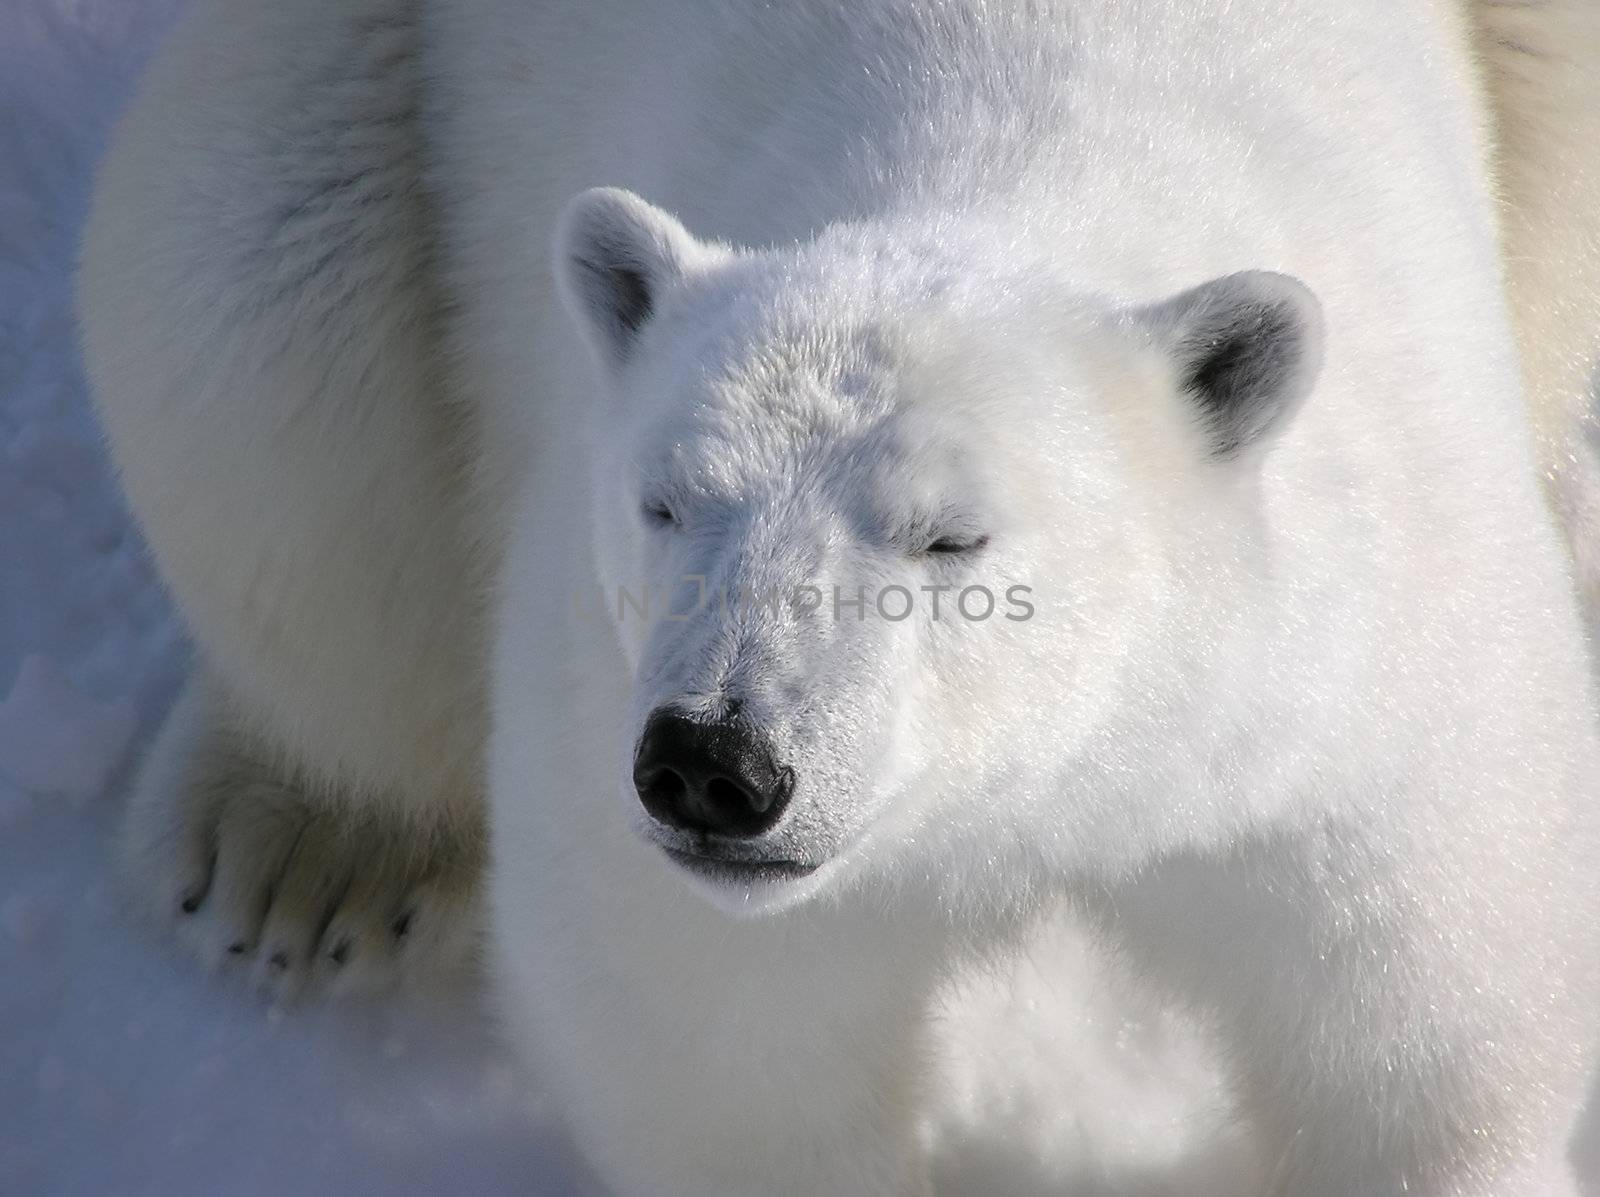 Low key intimate close-up of laying down polar bear catching first rays of light in the morning, best flluffy fur detail.   